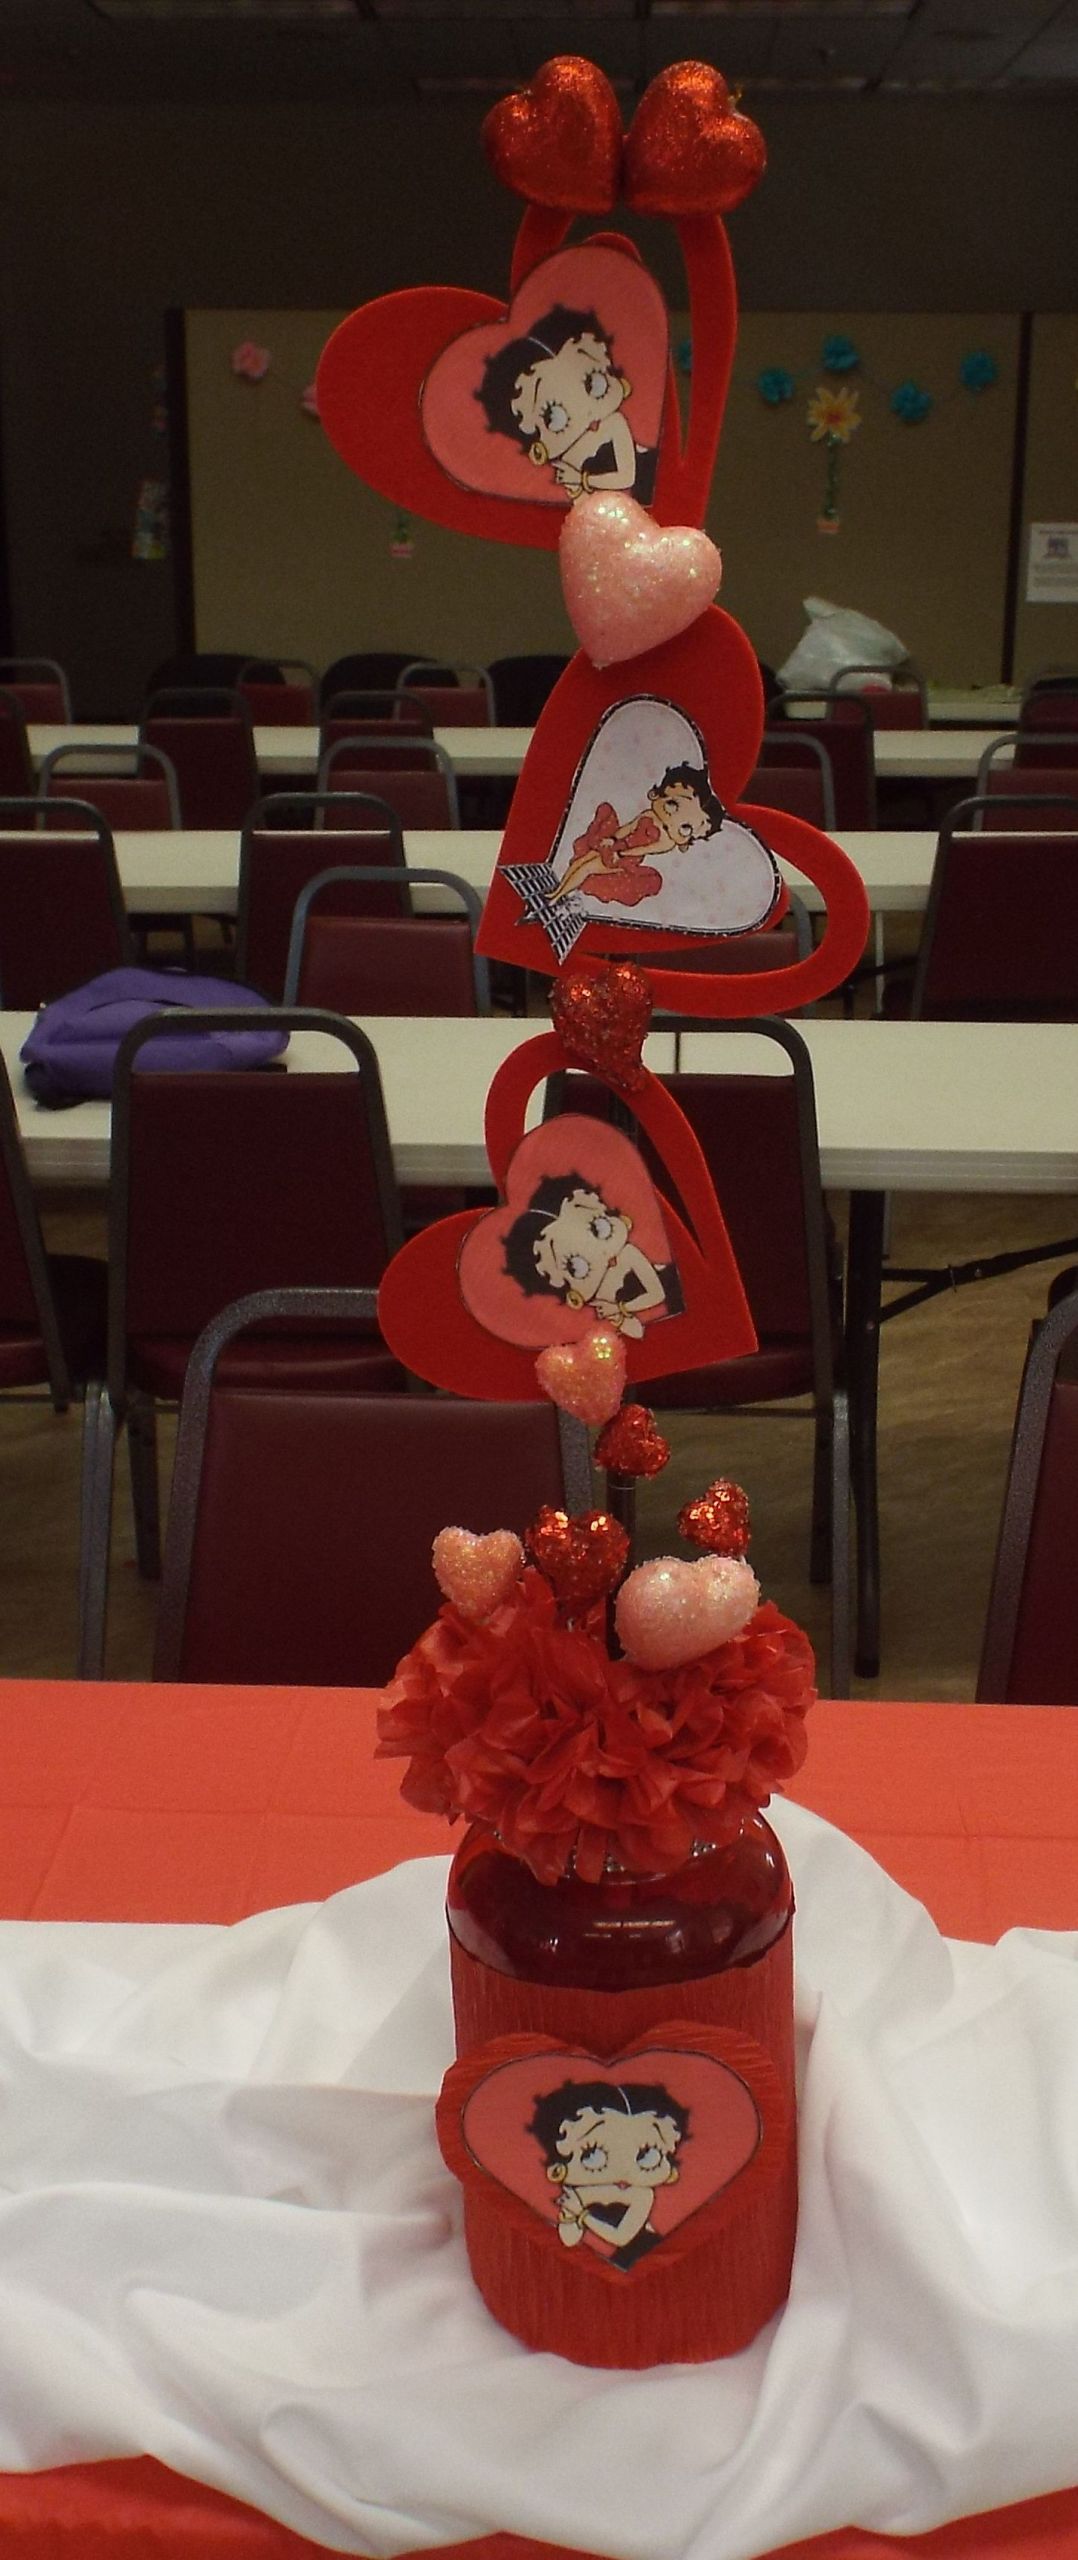 Betty Boop Birthday Decorations
 Betty Boop Centerpieces that I made